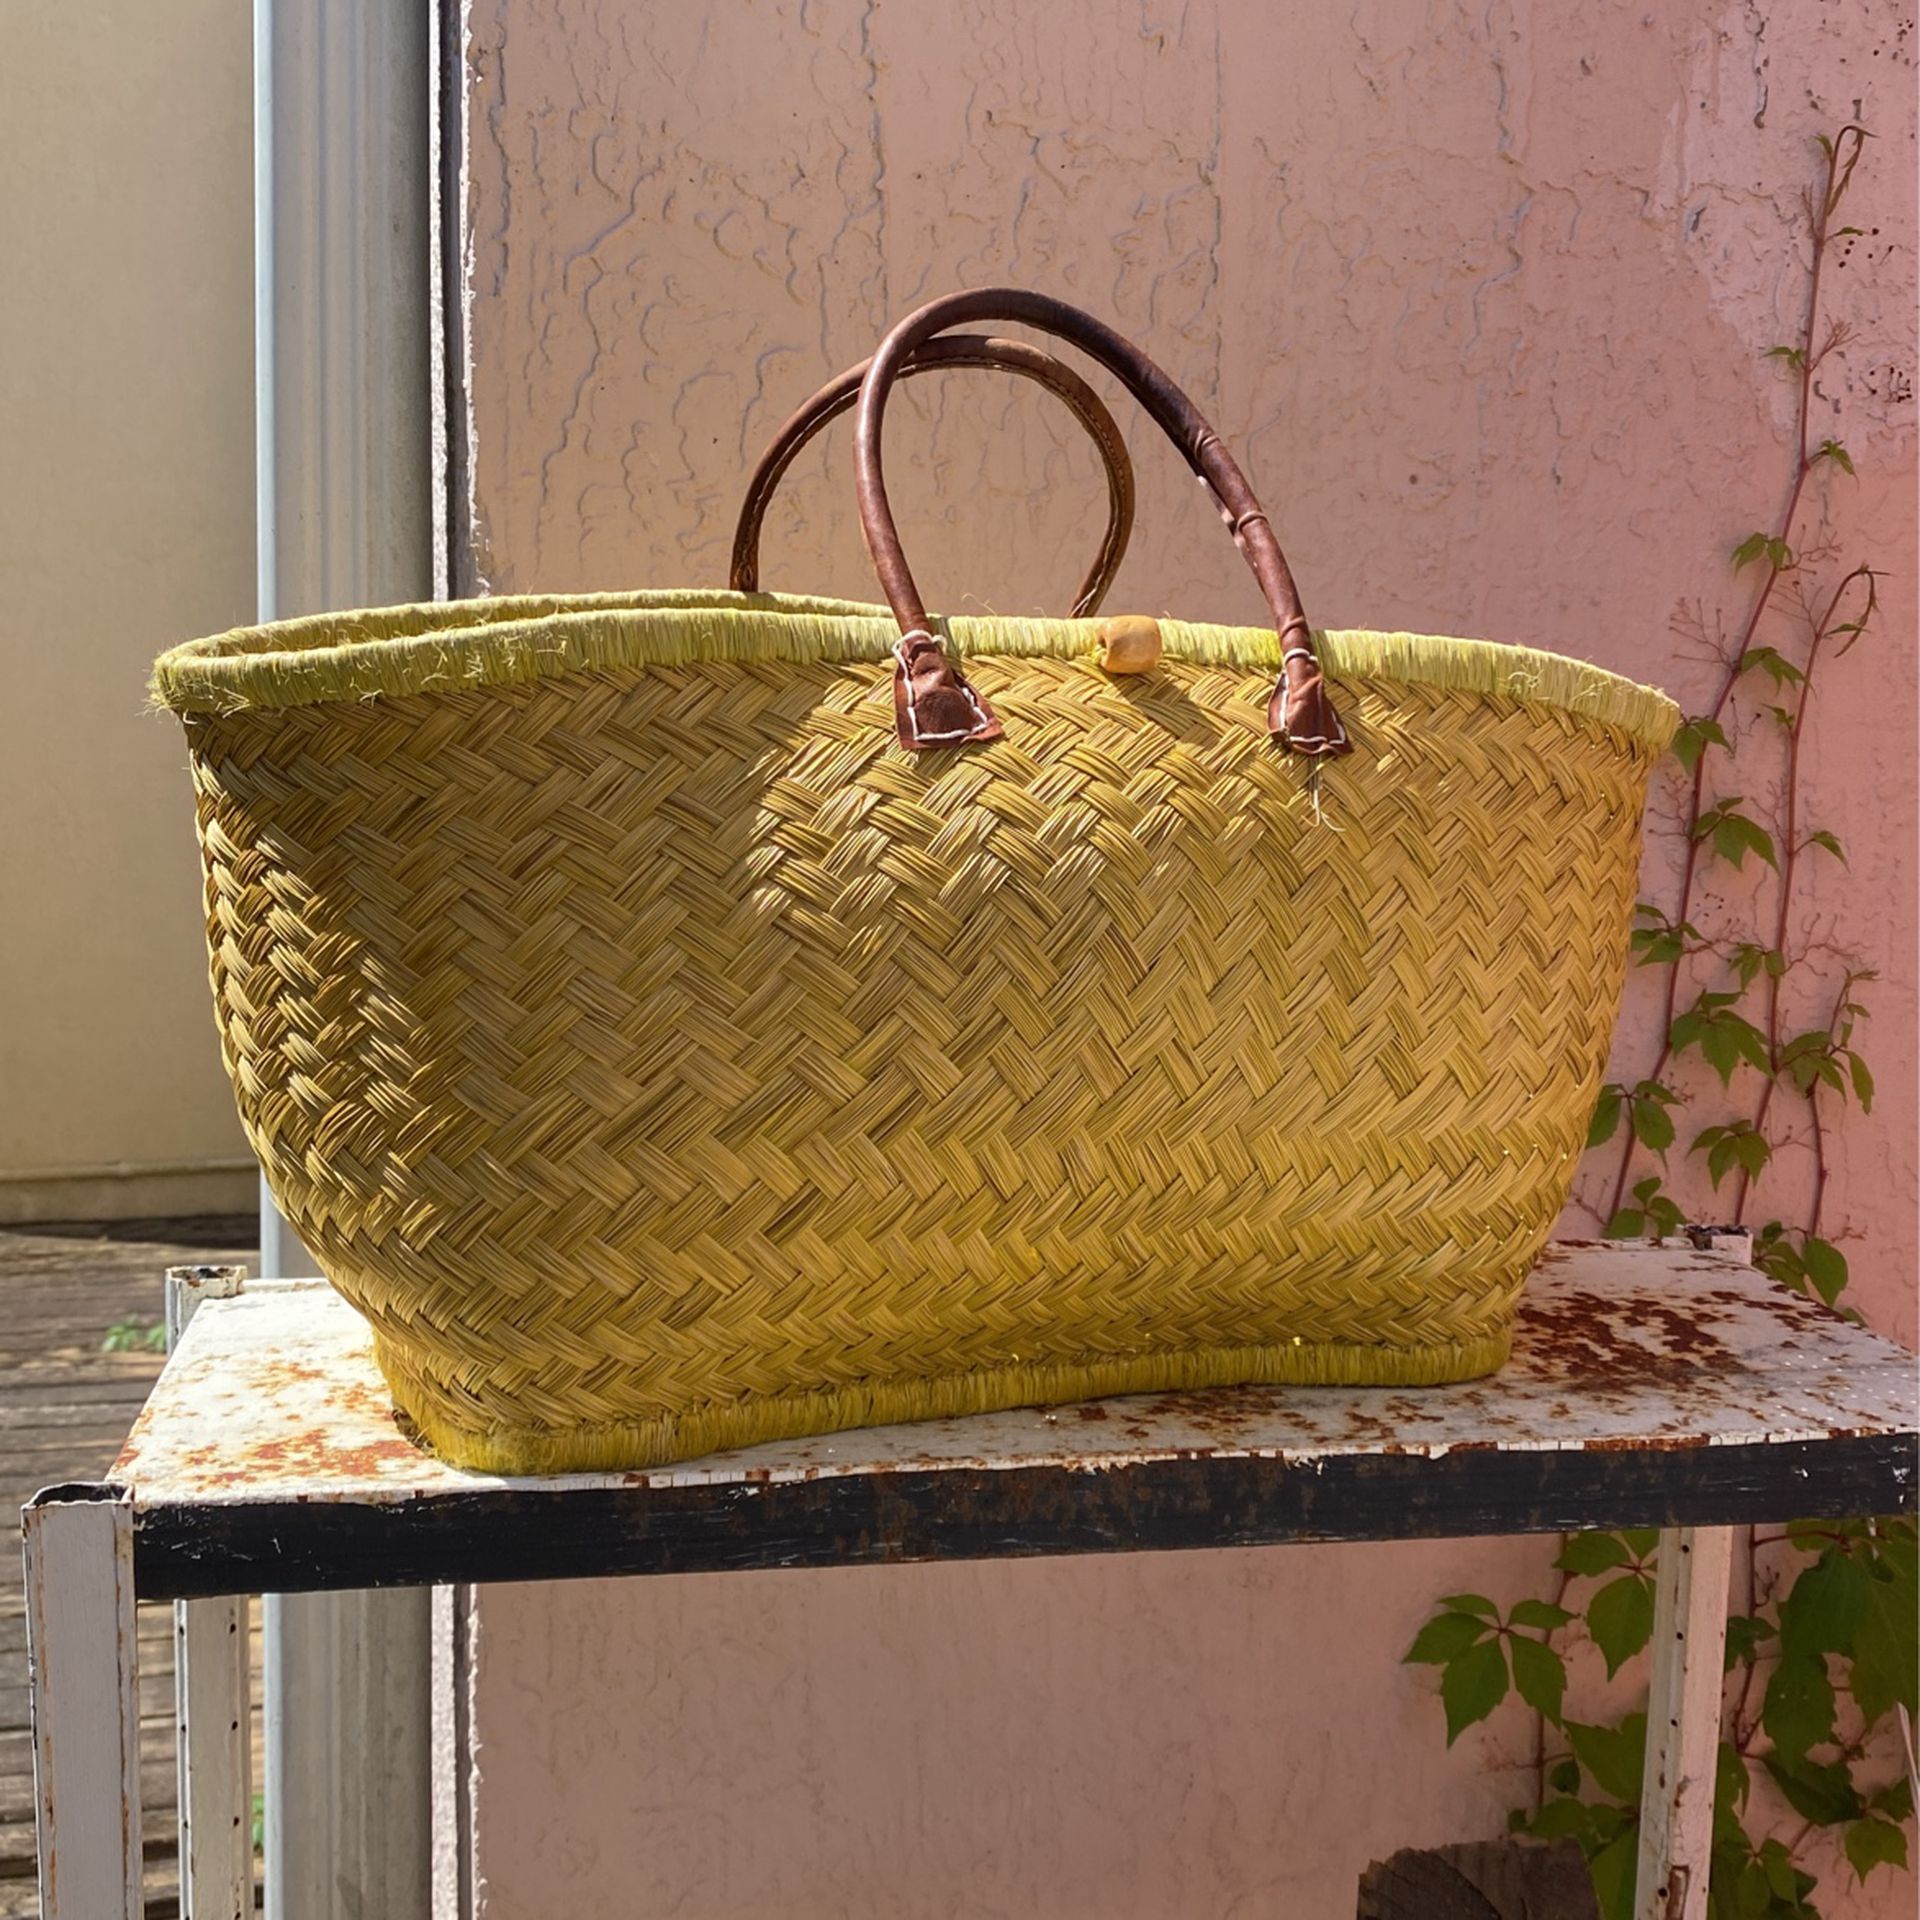 Straw Bag Leather Handles Wide Bottom Carryall “le Comptoin De La Plage” Pale Green 20x12x9”